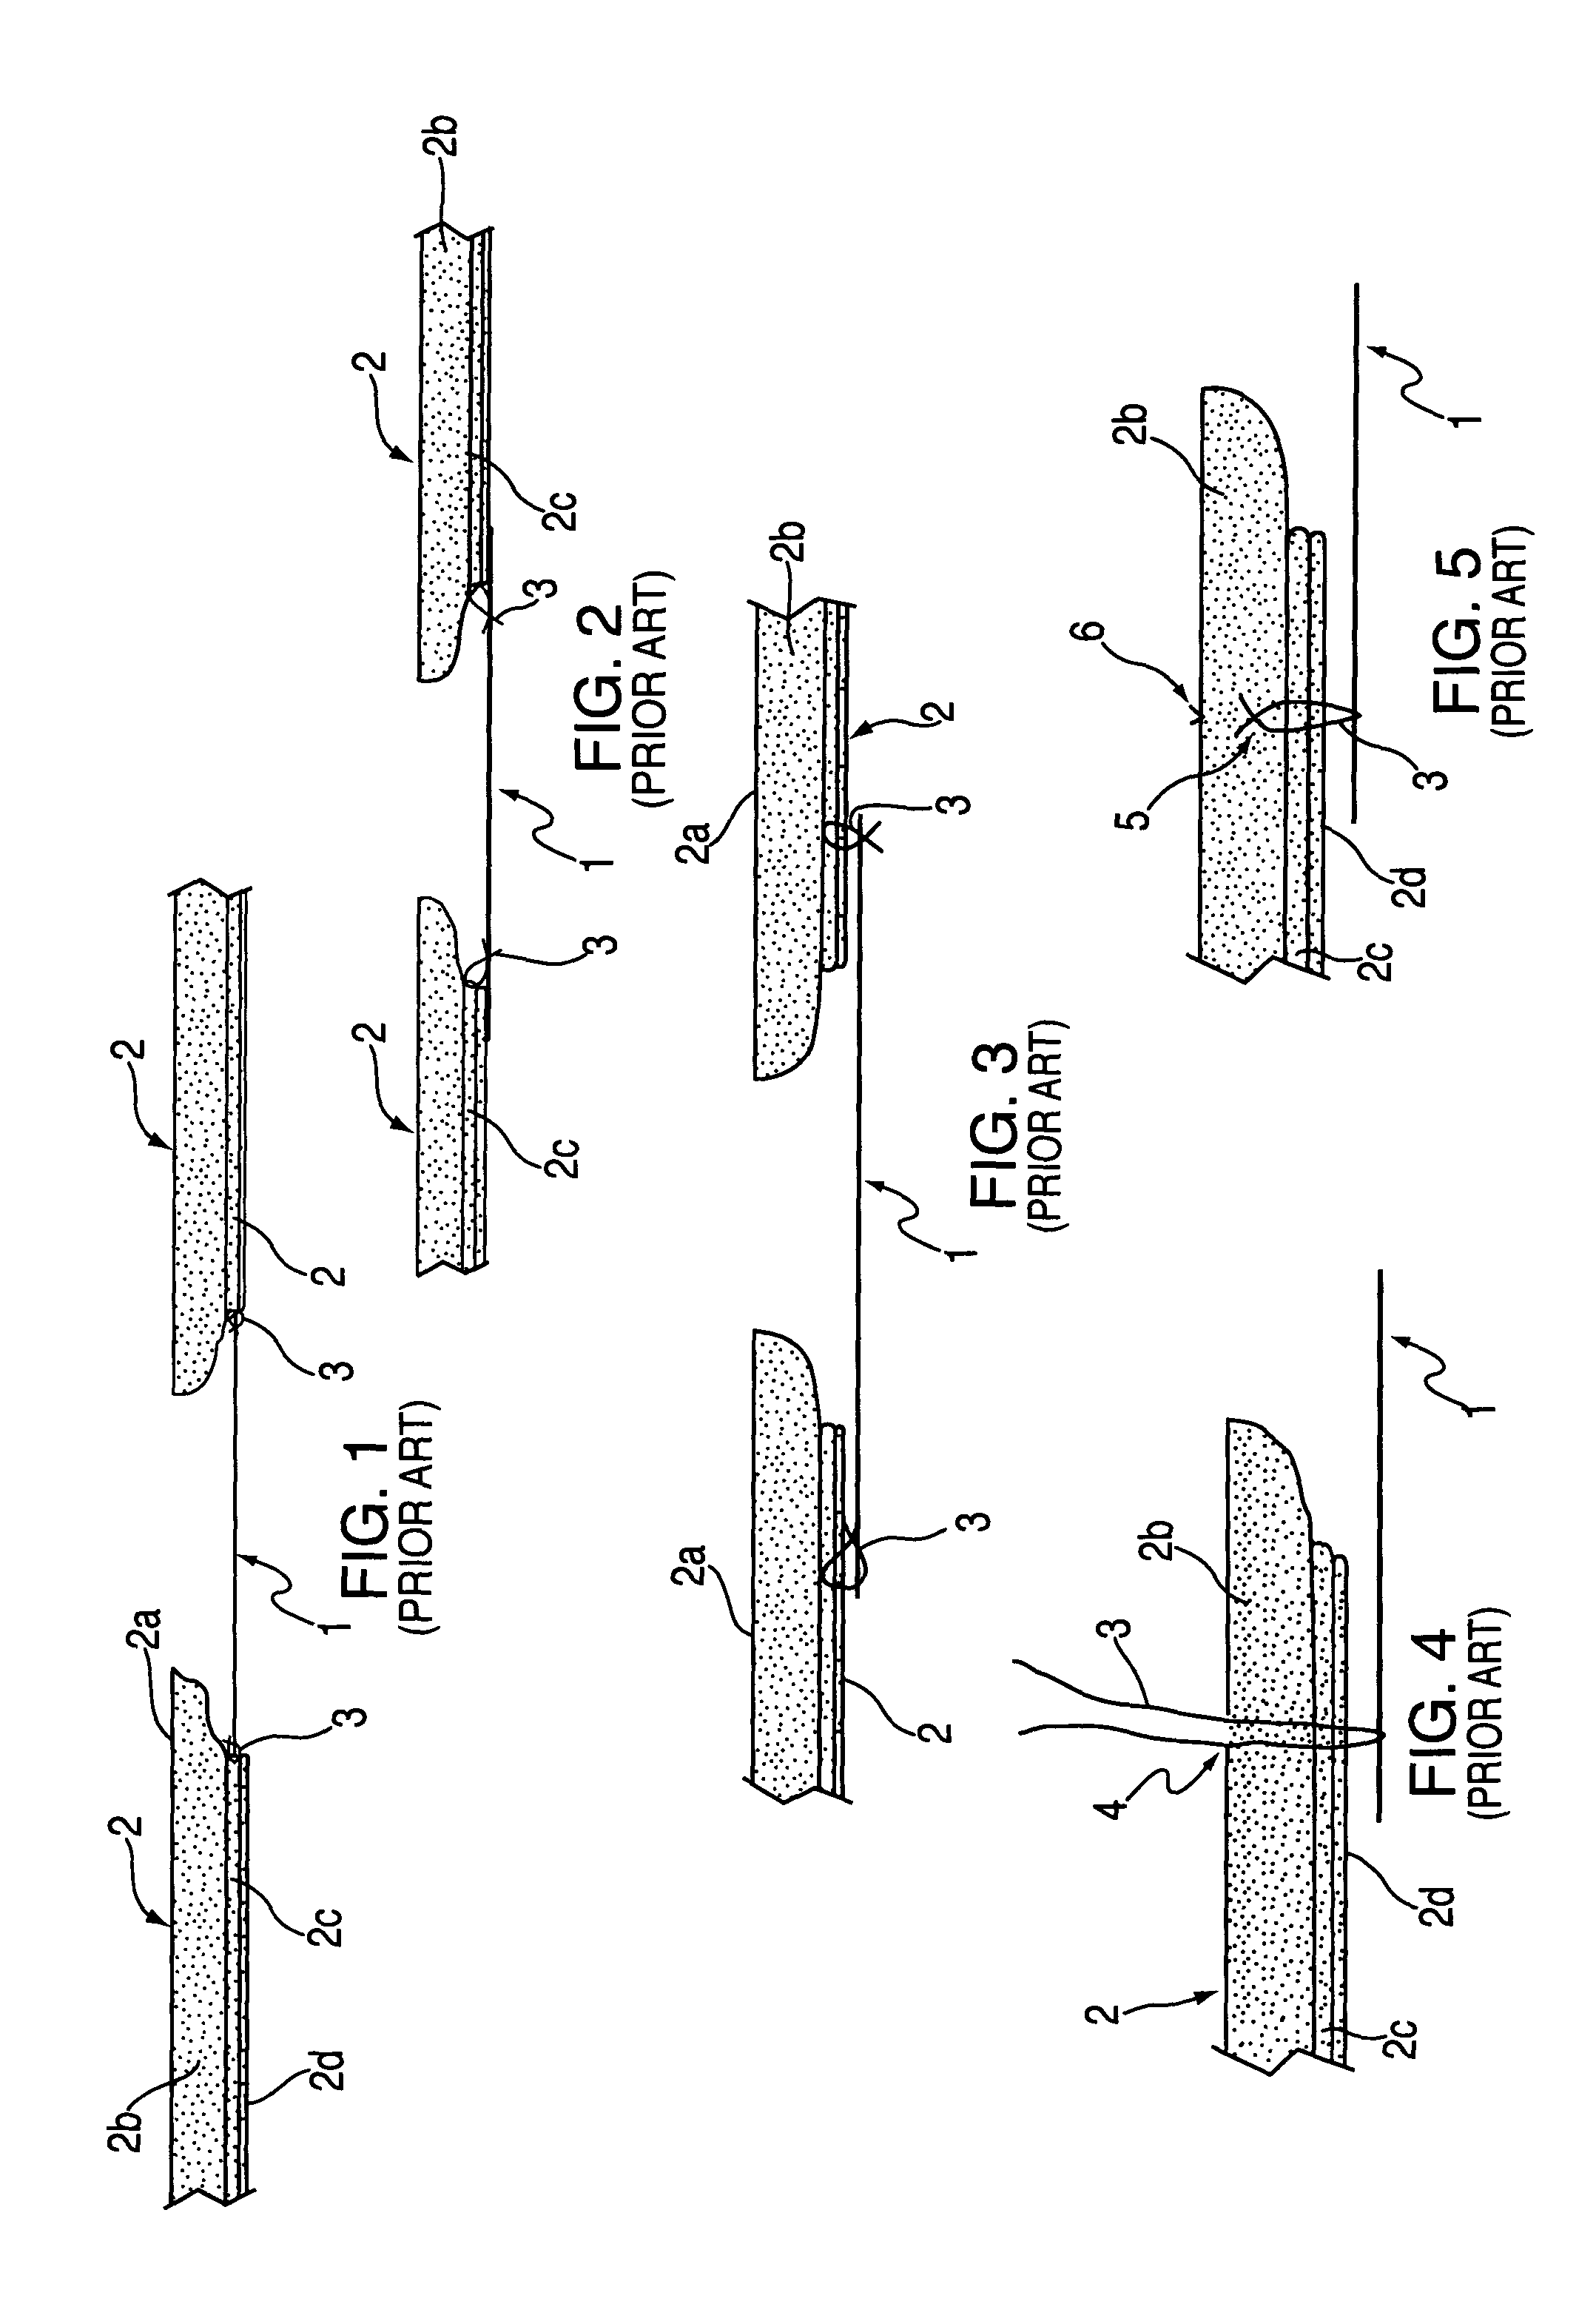 Device and method for tacking a prosthetic screen